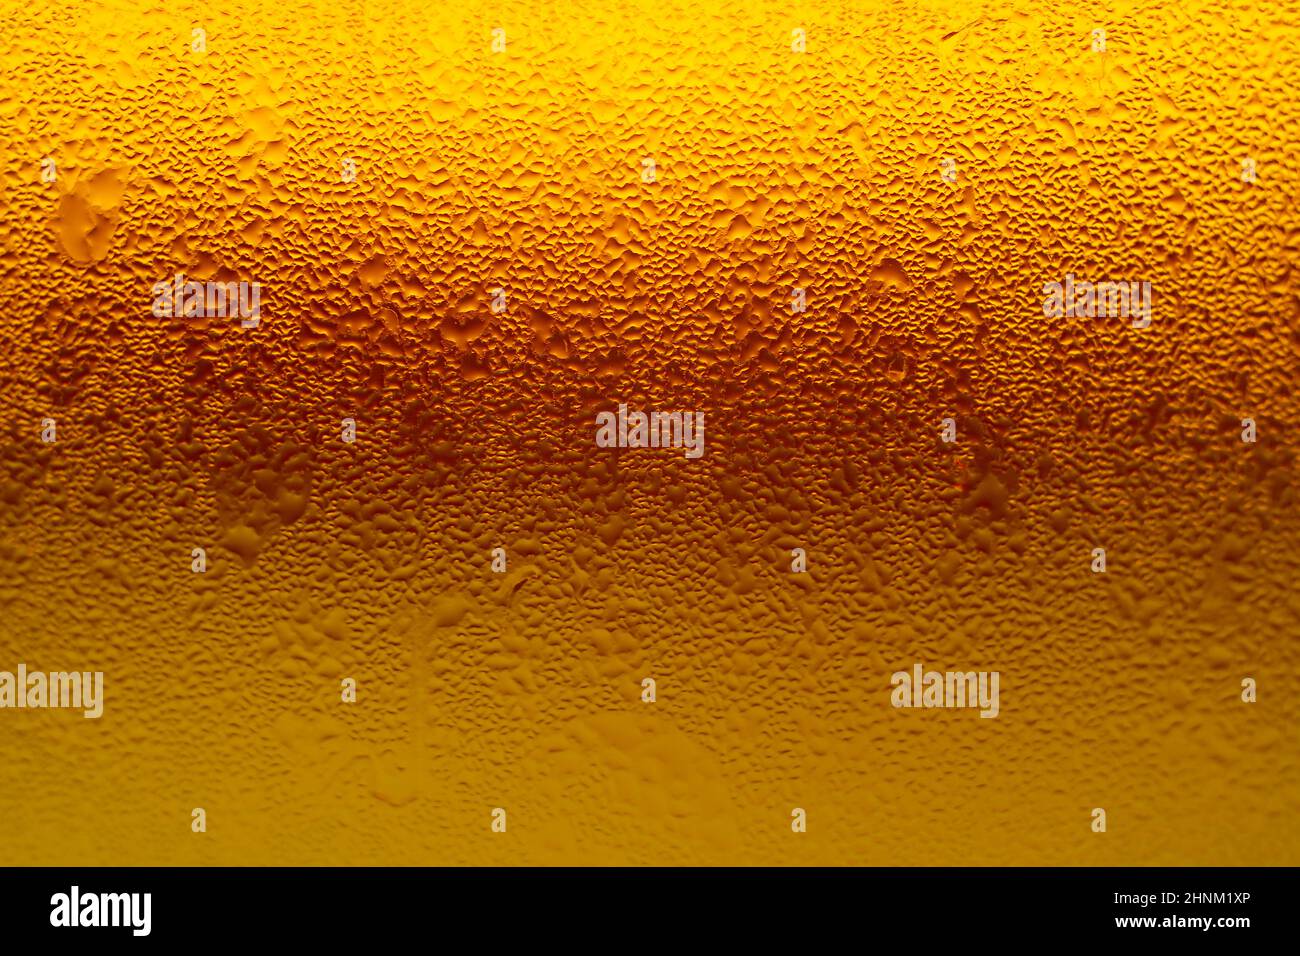 https://c8.alamy.com/comp/2HNM1XP/texture-of-water-droplets-on-gradient-golden-yellow-lager-beer-glass-bottle-2HNM1XP.jpg